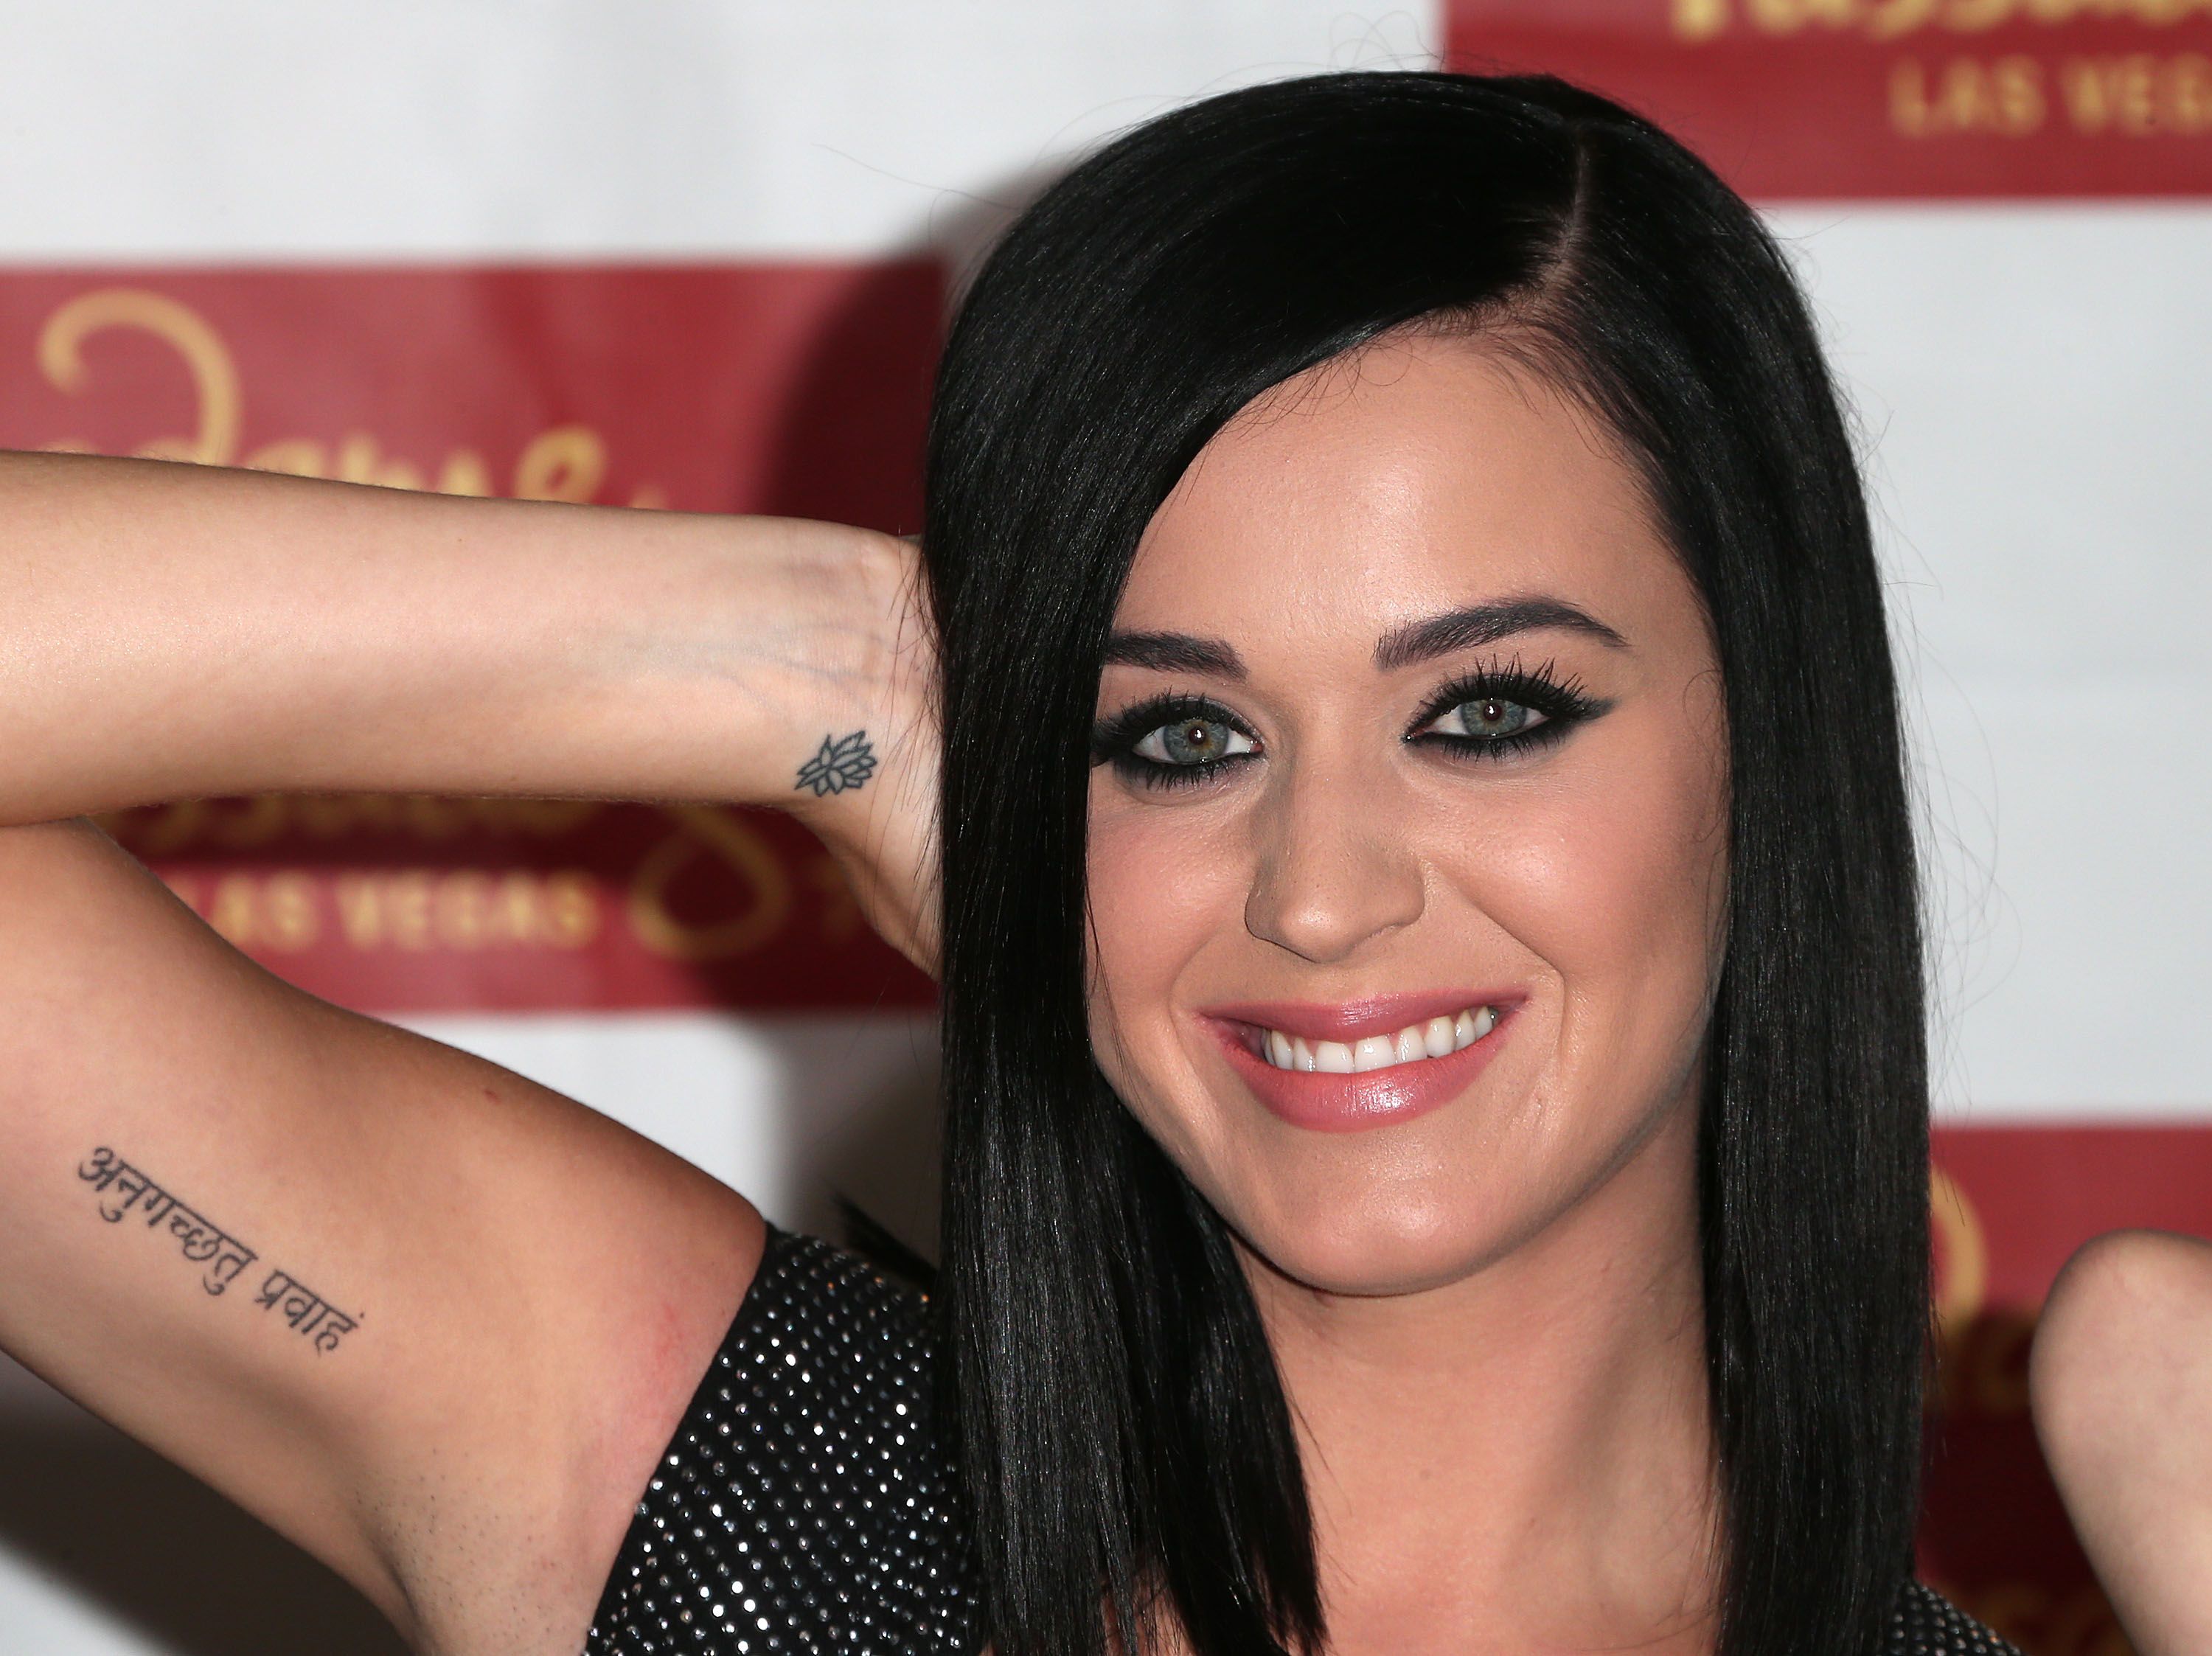 Katy Perry Unveils Her Wax Figure For Madame Tussauds' Las Vegas at Paramont Studios on January 26, 2013 in Hollywood, California | Photo: Getty Images